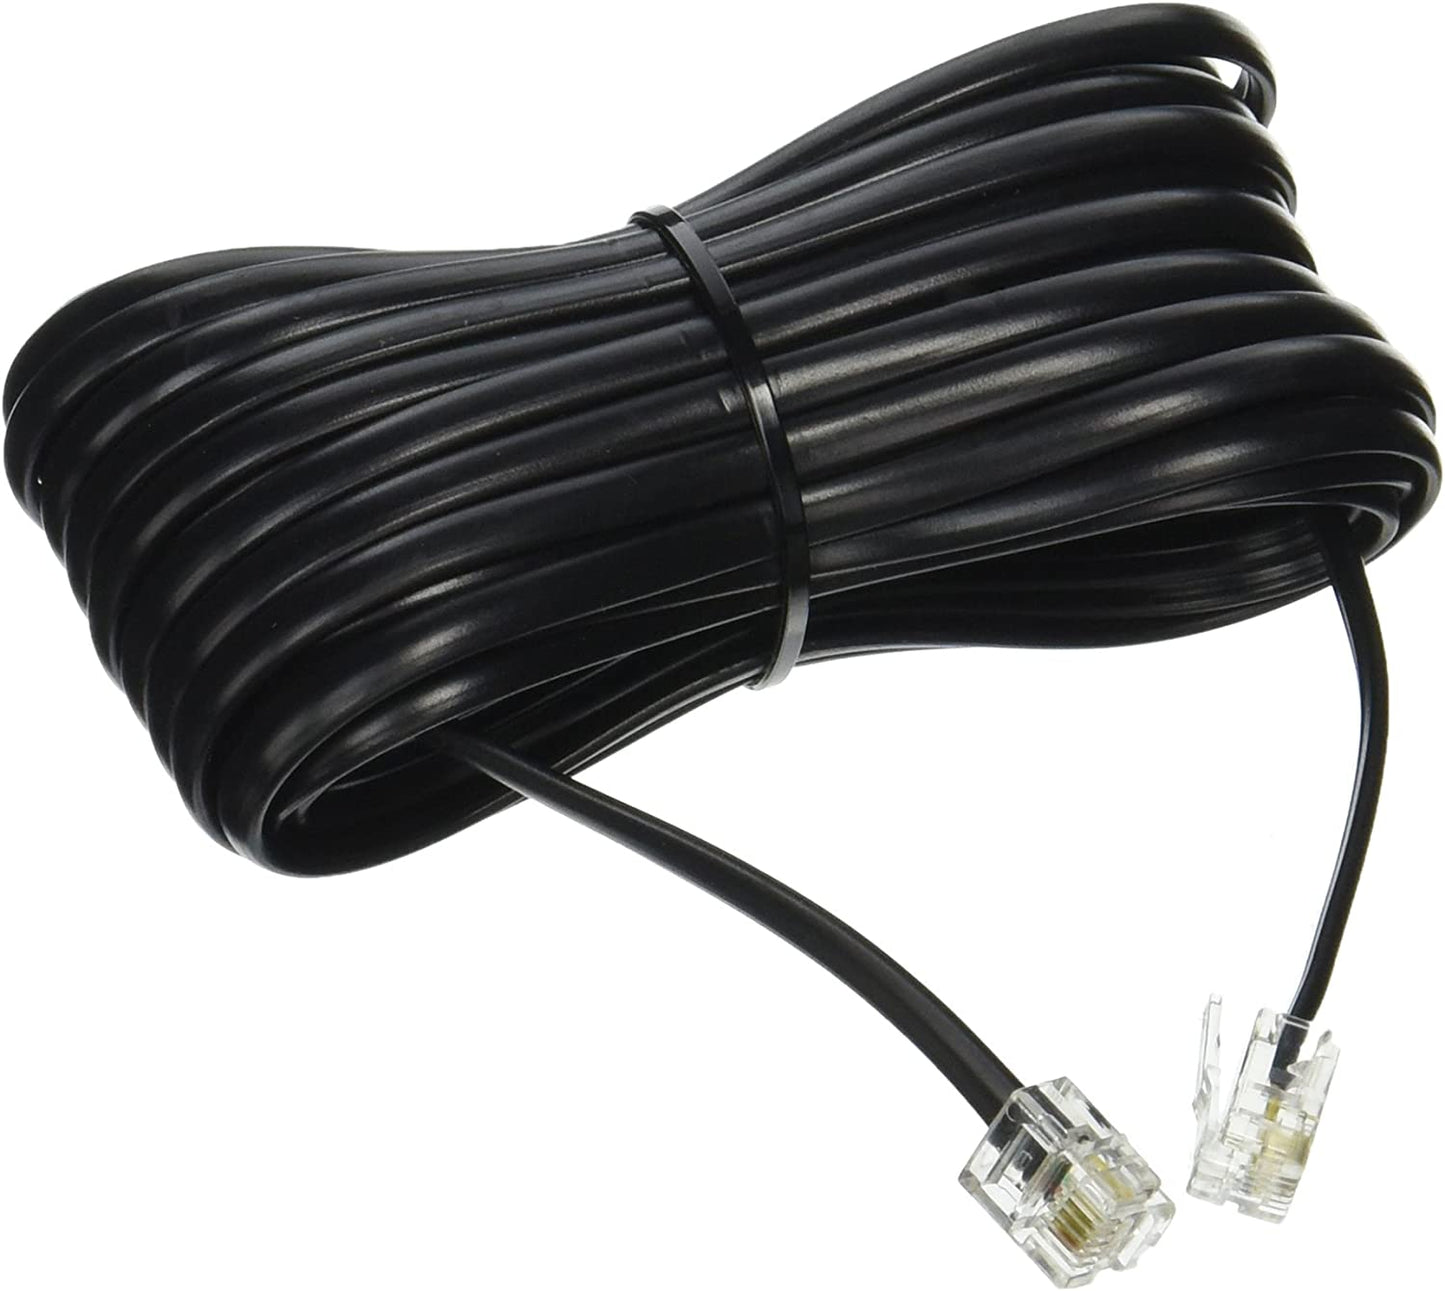 Telephone Extension Cord 25 Feet Long Phone Cable Line Wire - Black Includes Cable Clips